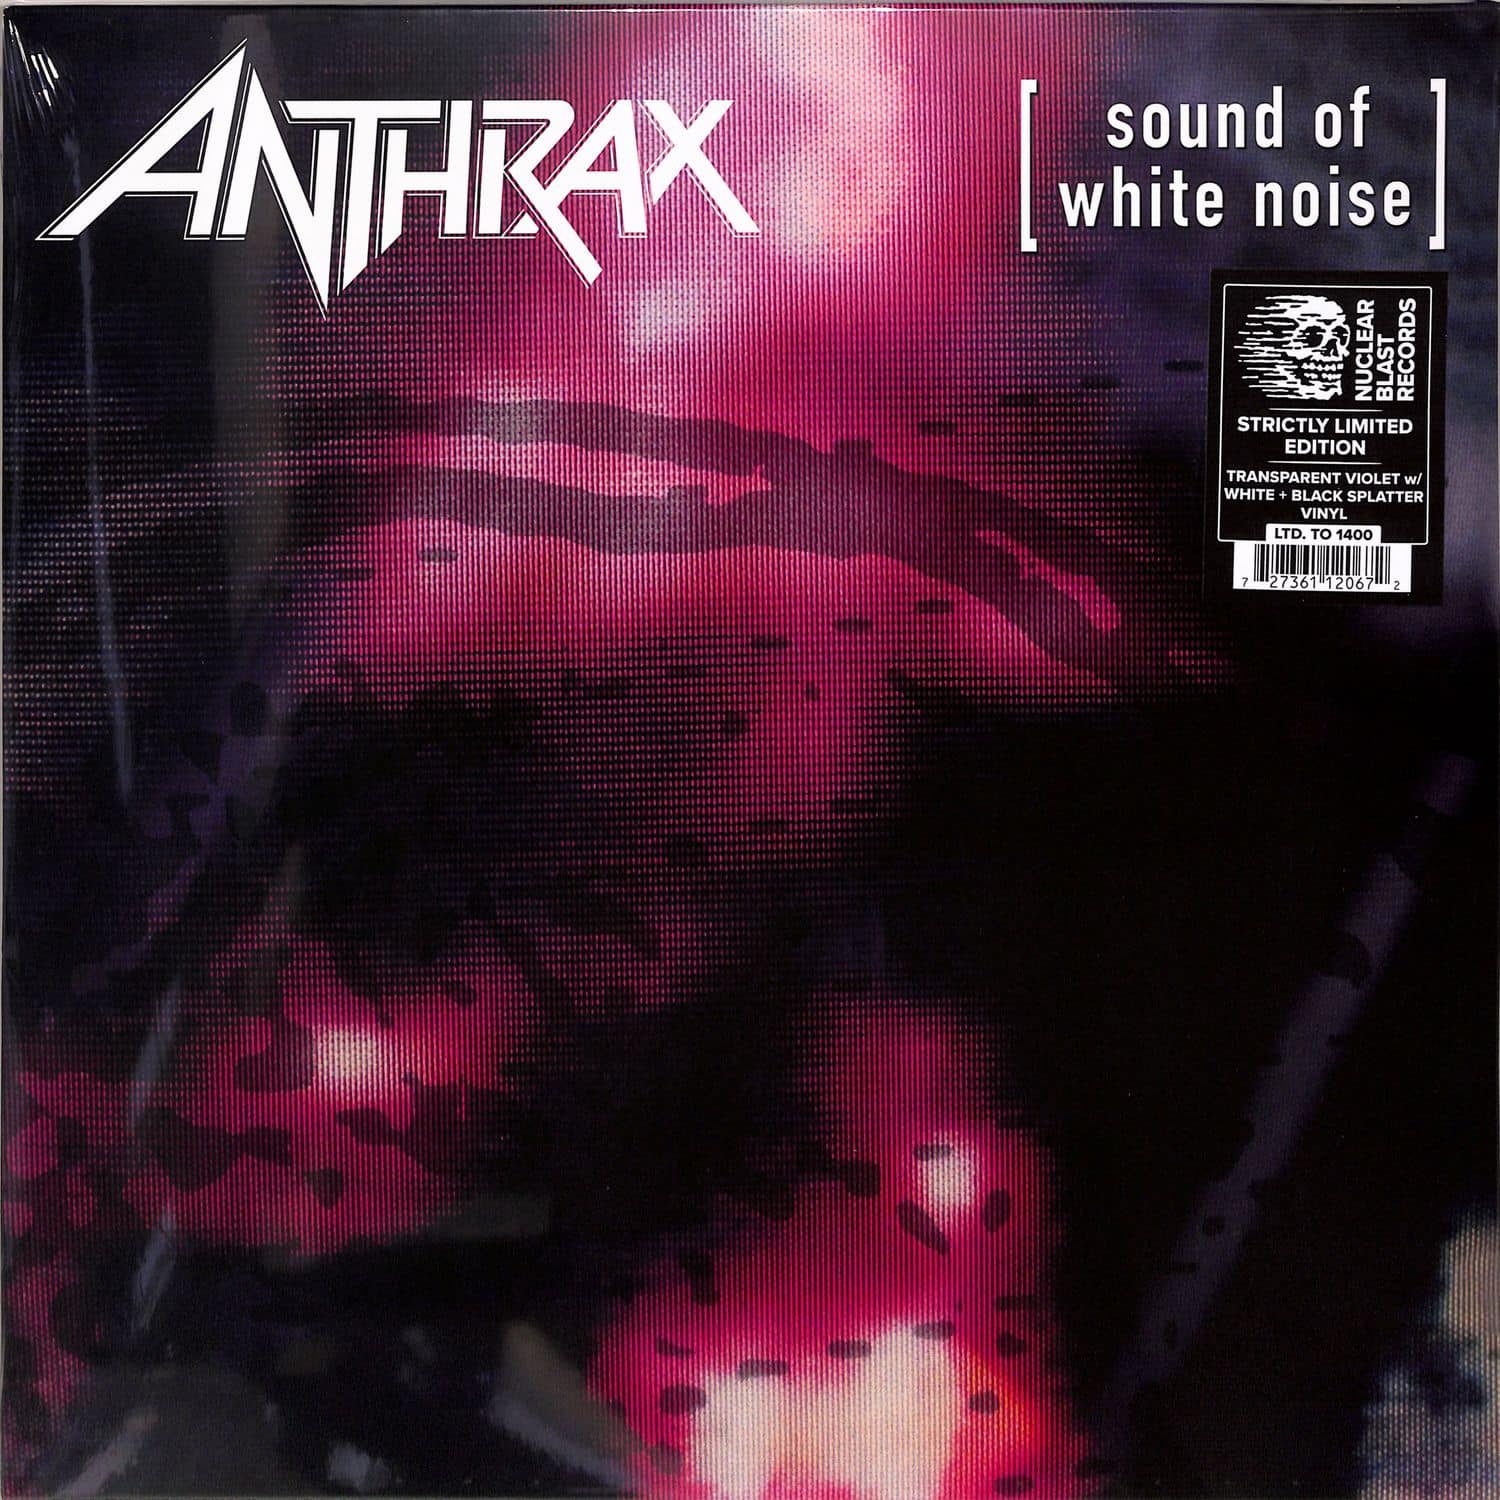 Anthrax - SOUND OF WHITE NOISE 